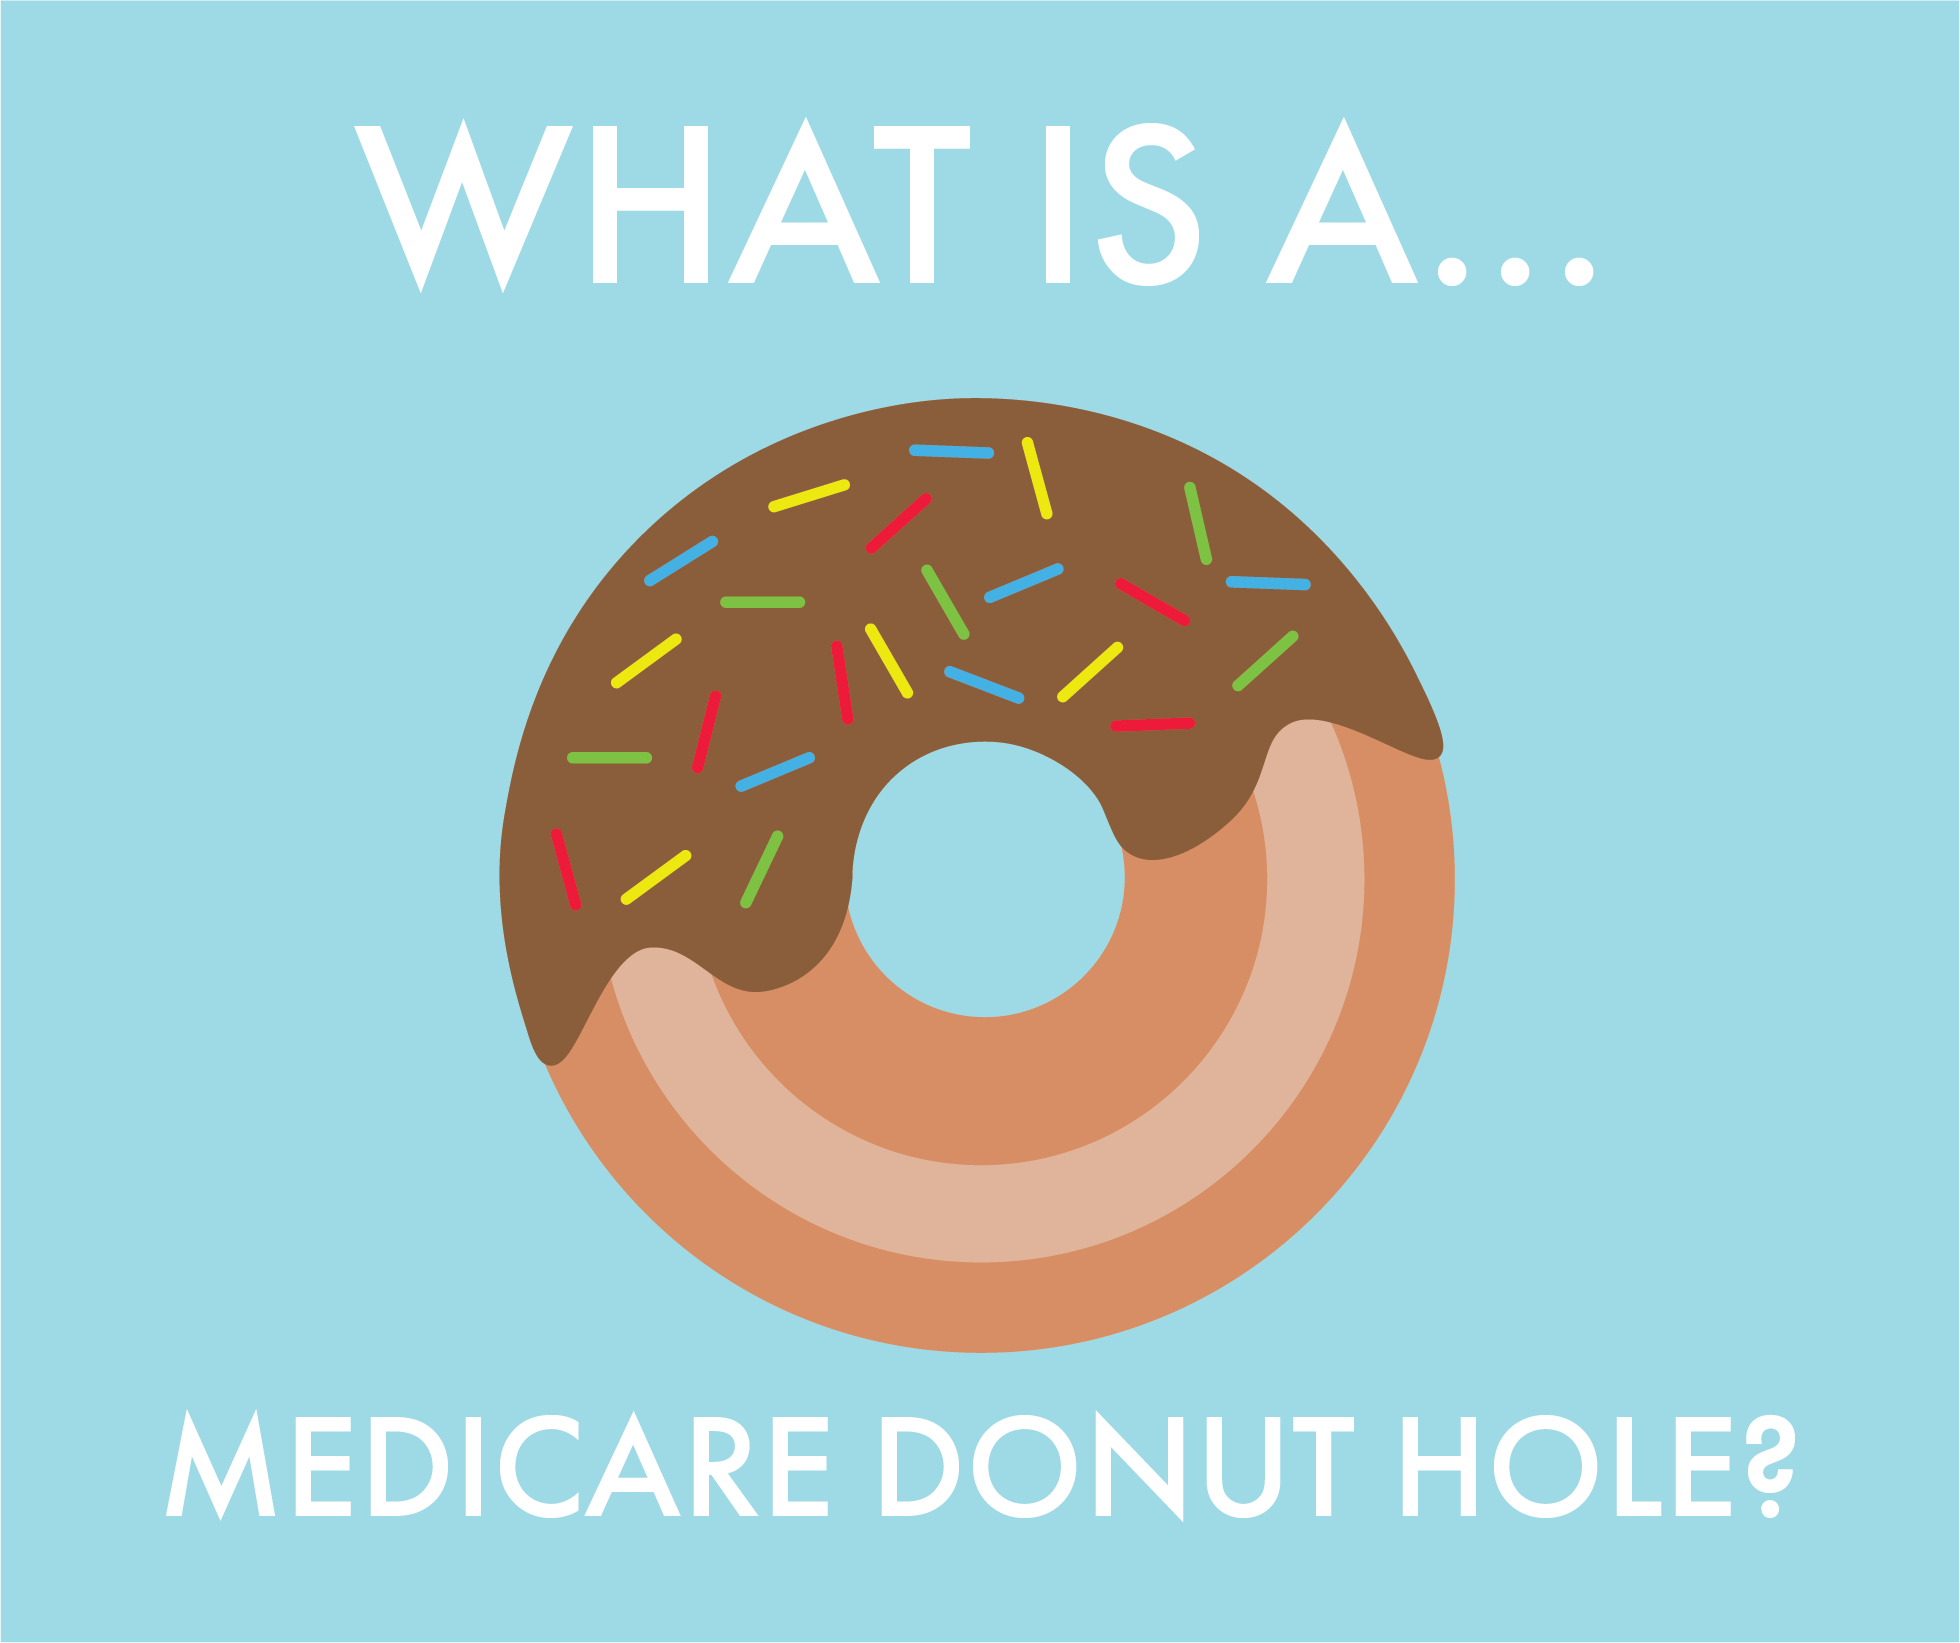 What is a Medicare 'Donut Hole'?